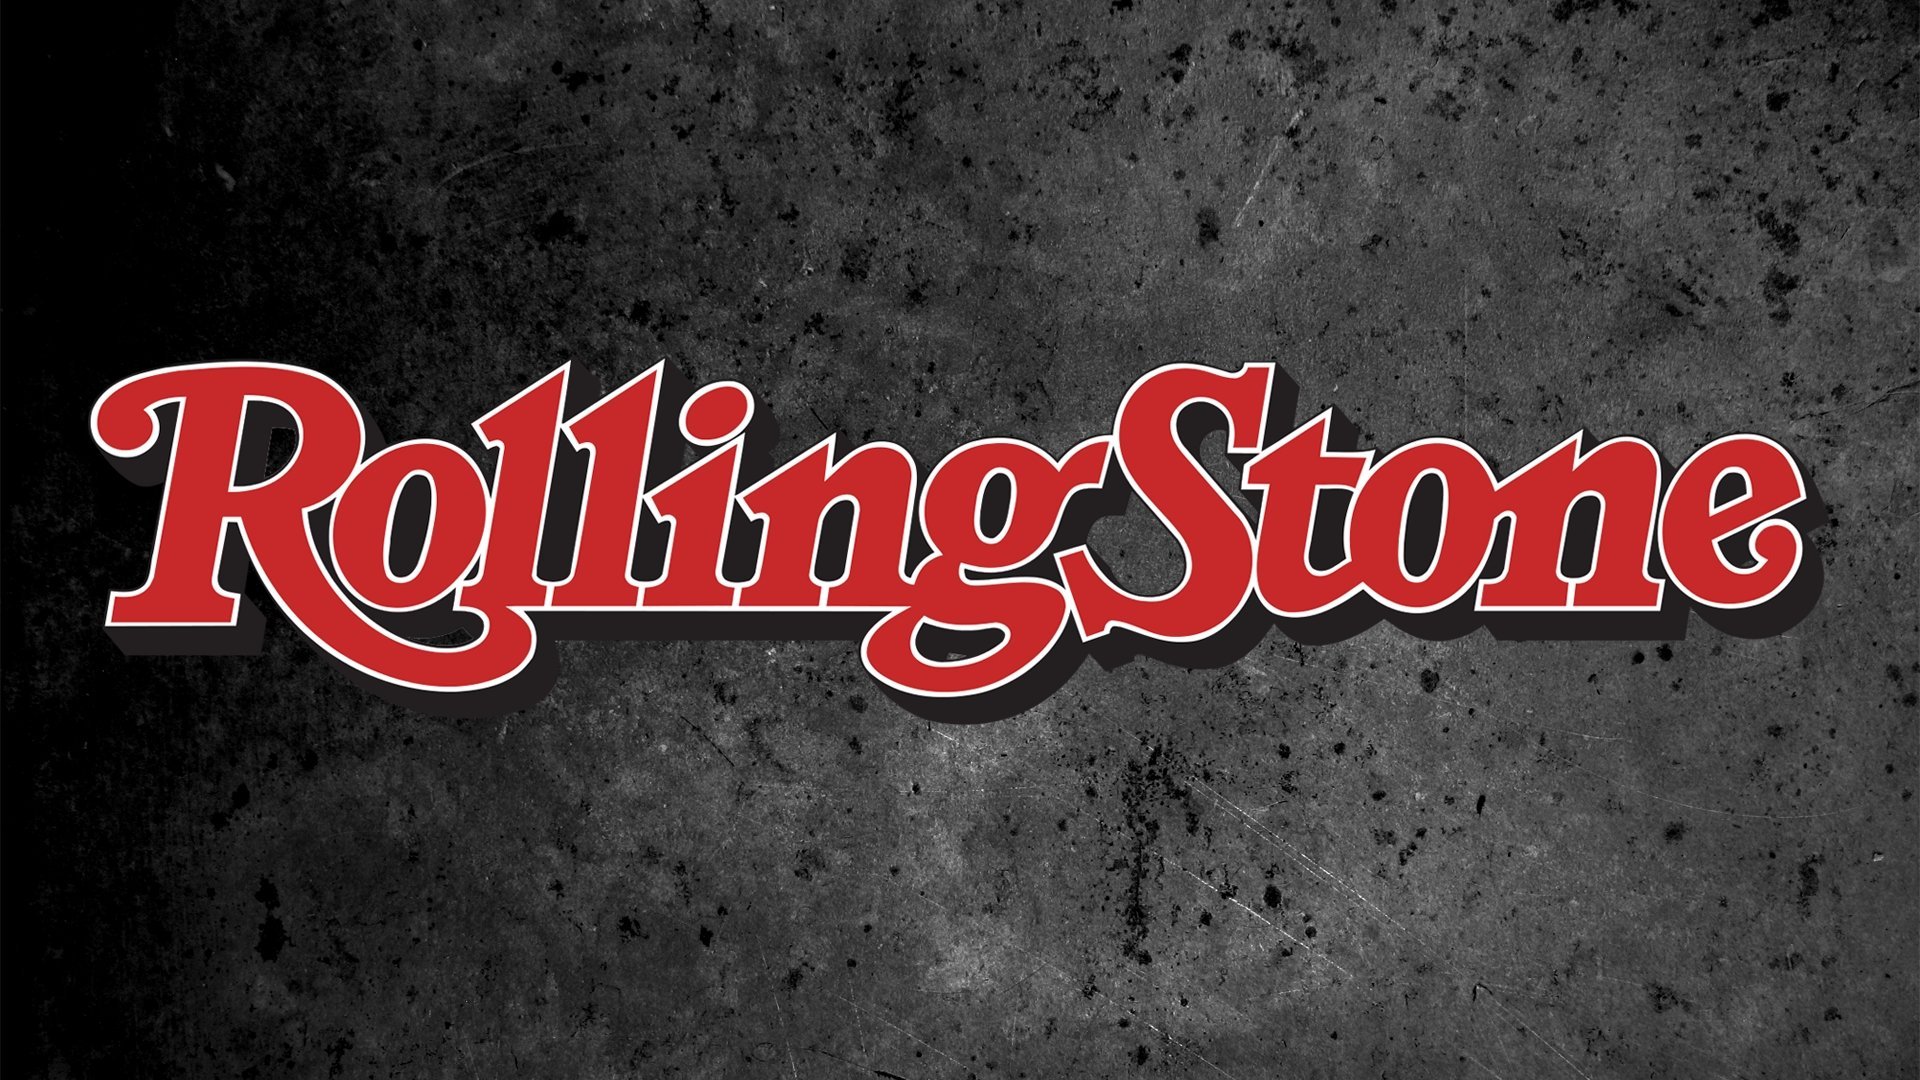 It has been clear for months that Rolling Stone committed journalistic malpractice in its discredited story about an alleged sexual assault at the University of Virginia. Sunday night brought additional details on the magazine's failures.